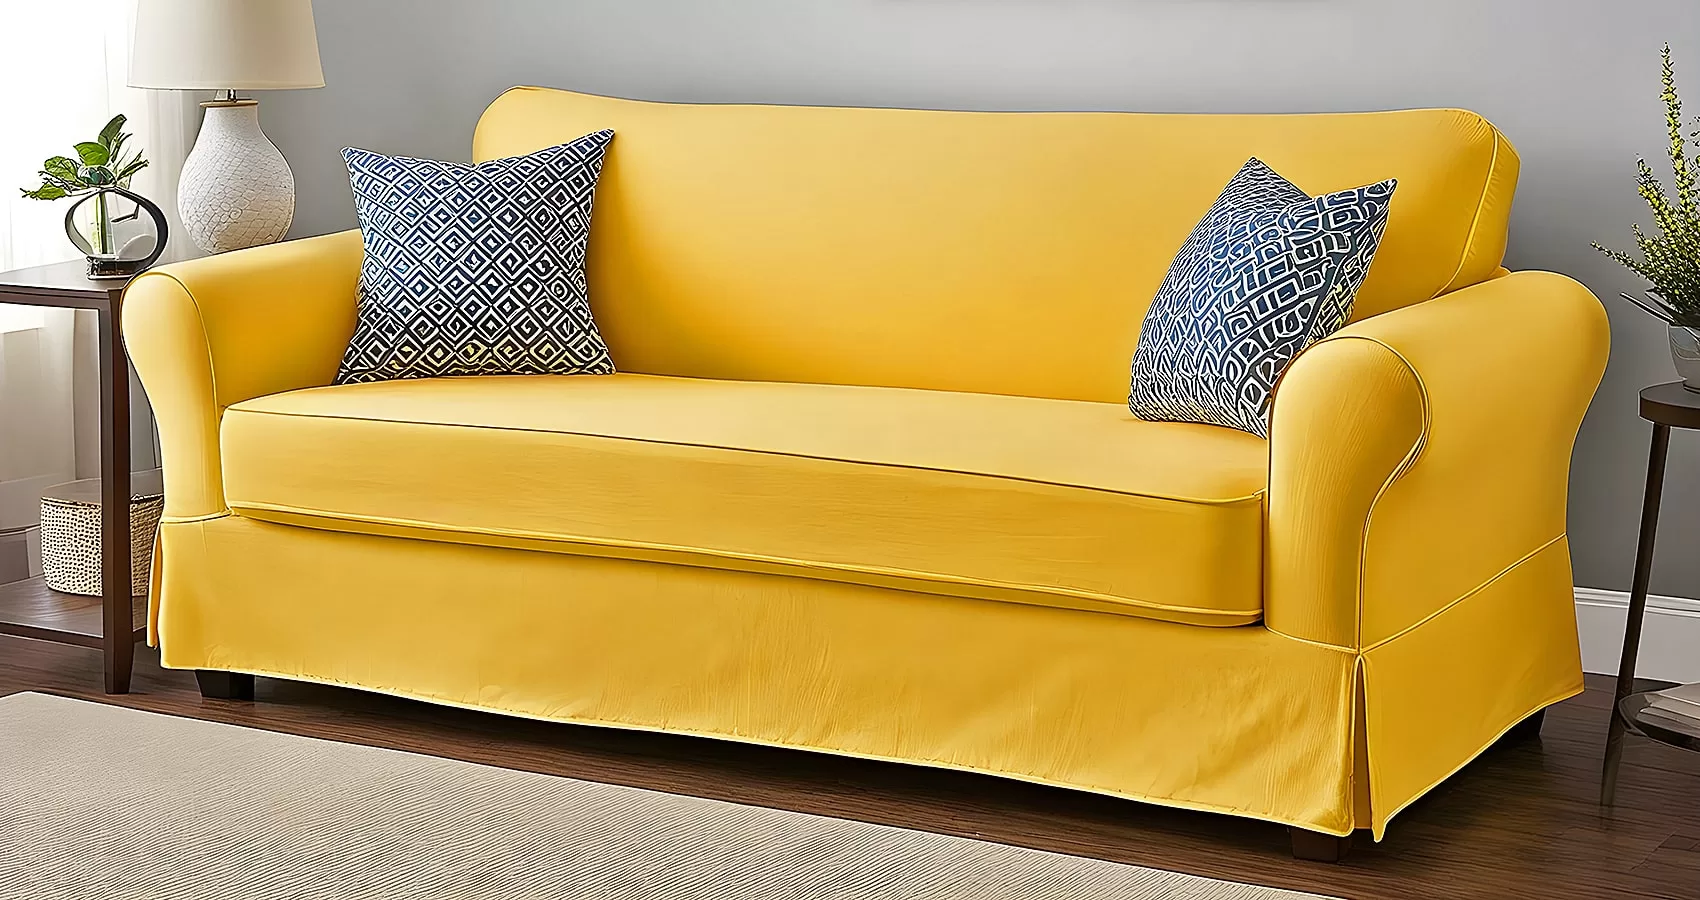 Yellow Couch Covers | Yellow Sofa Covers for Versatility | Yellow Couch Slipcovers